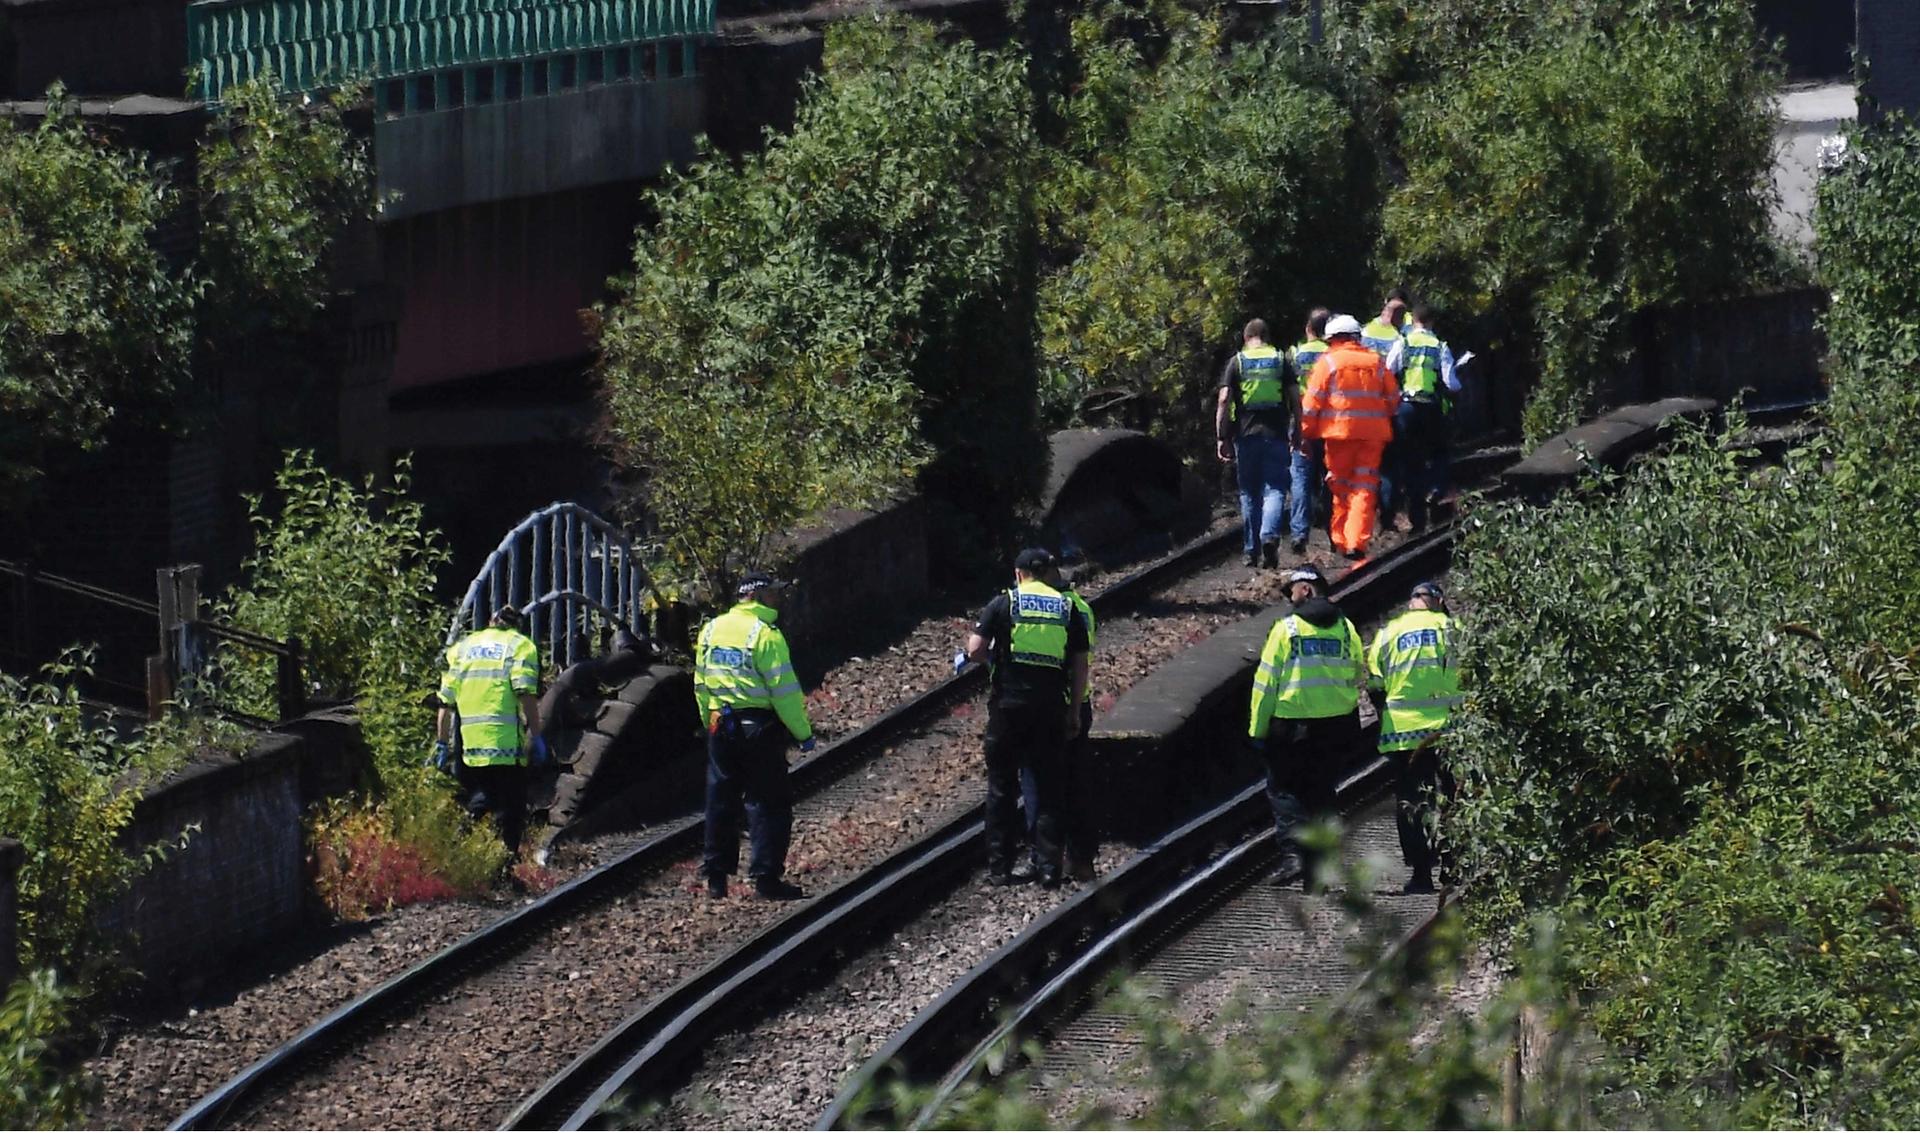 Police search rail tracks following a rail incident in south London on 18 June. British Transport Police (BTP) report that three bodies had been found on the tracks at Loughborough Junction Photo by Andy Rain/EPA-EFE/REX/Shutterstock (9719407b)